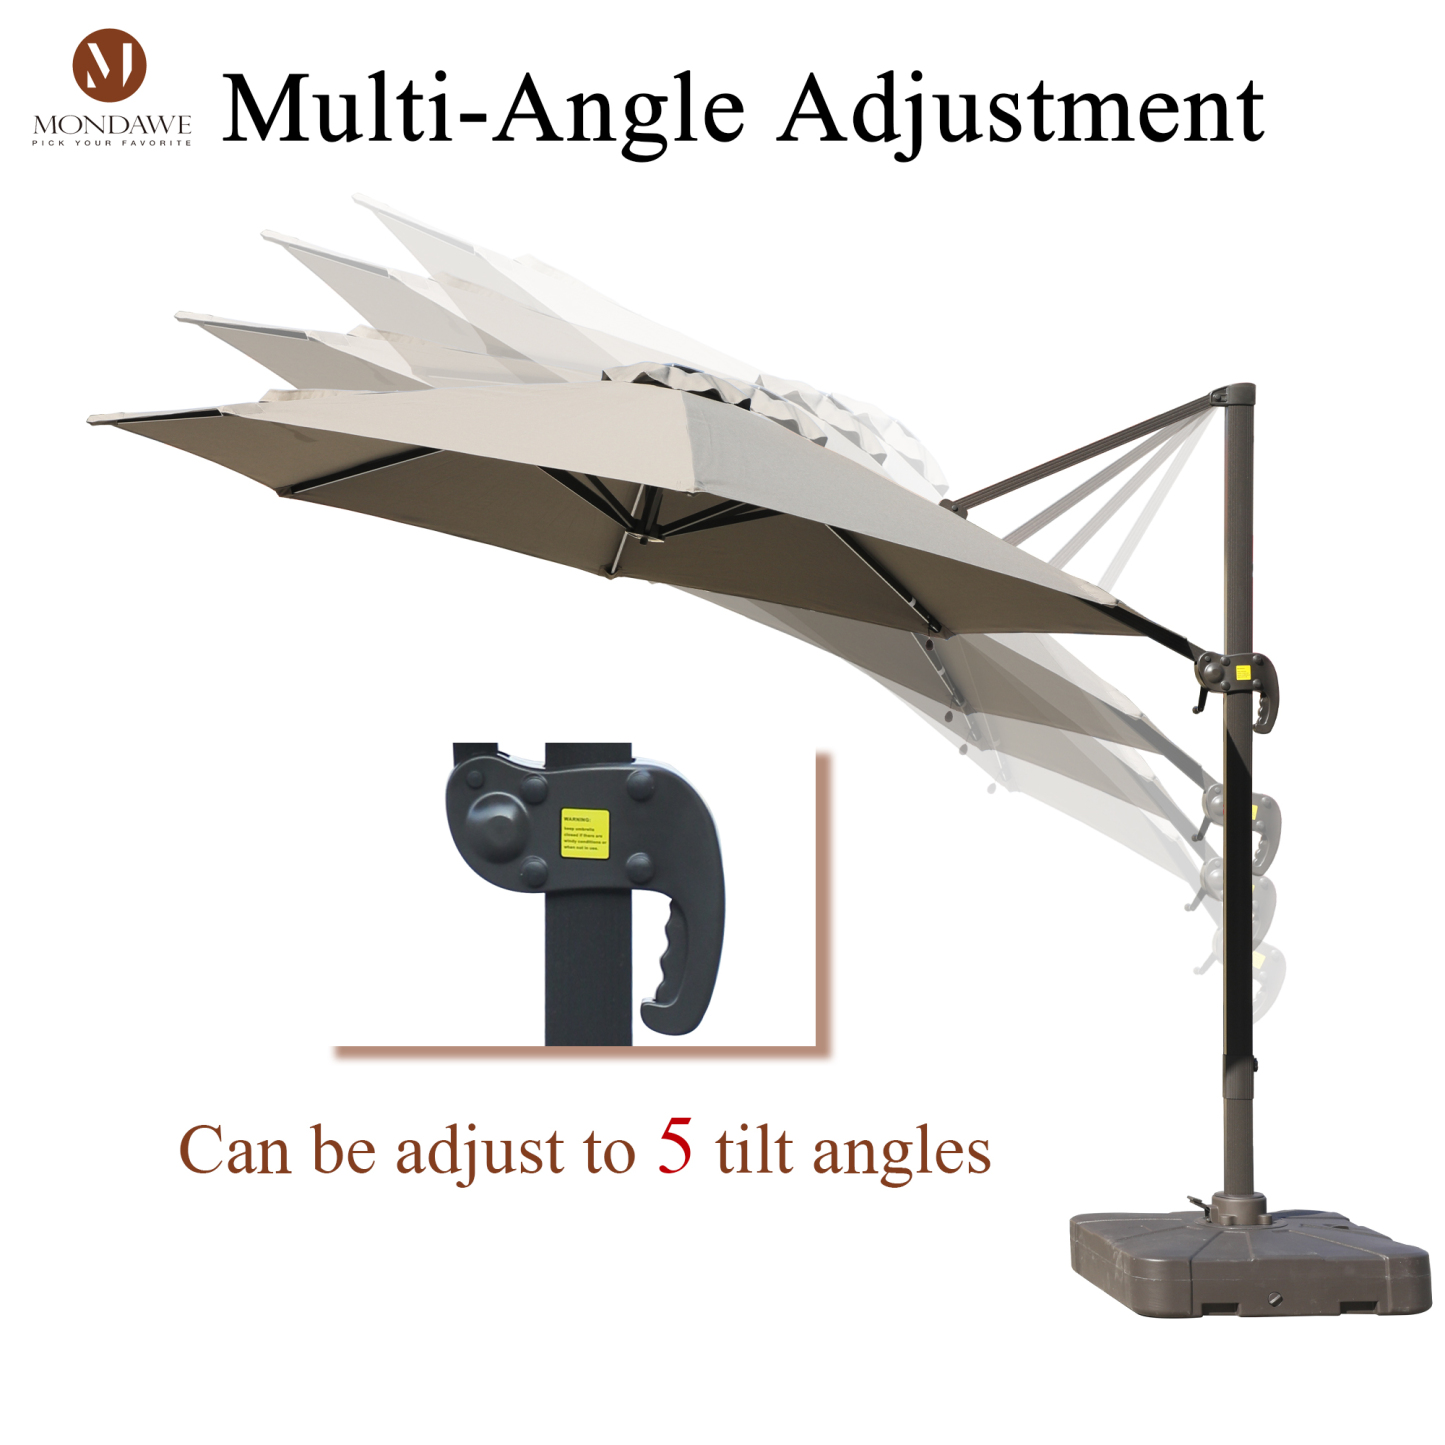 Mondawe 11 ft. Outdoor 360° Rotation Patio Cantilever Umbrella with Led Lights and Base for Garden-Mondawe